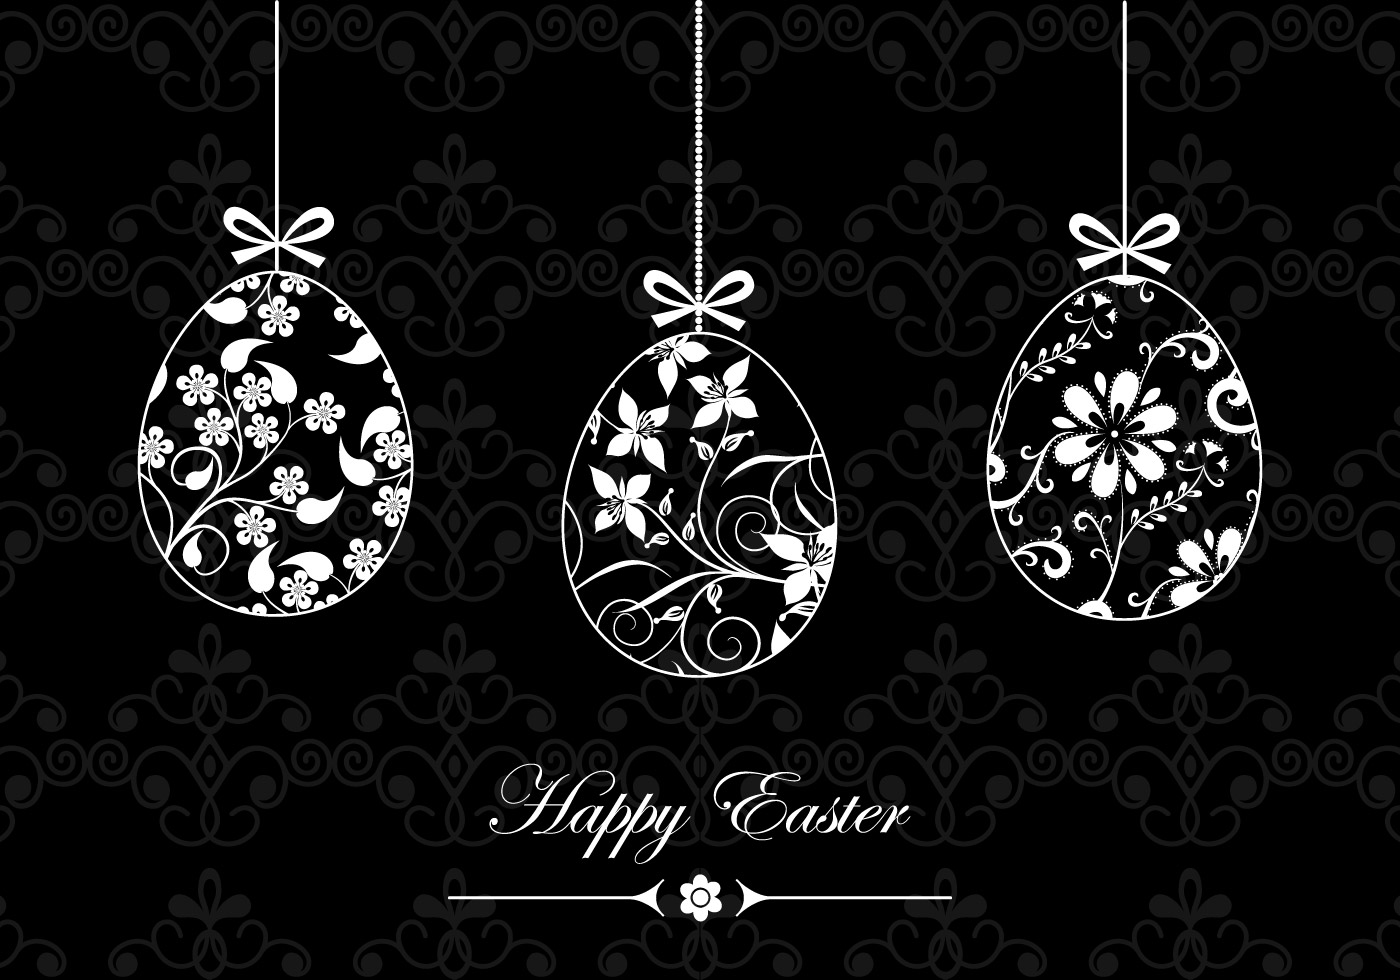 Black and White Happy Easter Vector Wallpaper